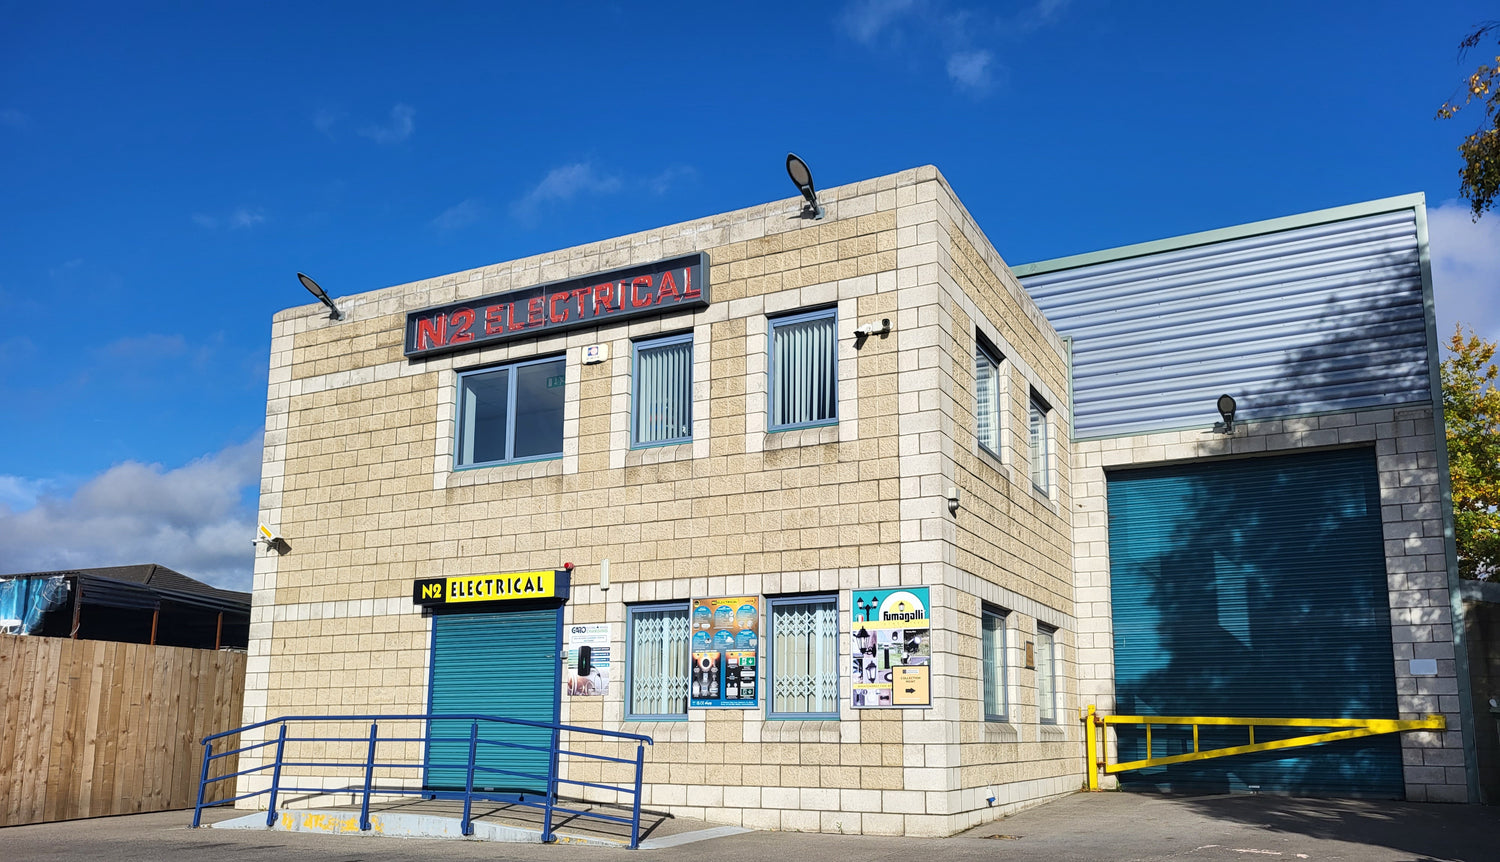 N2 Electrical is Ashbournes largest and best stocked Electrical Wholesaler & Lighting supplier. Located 15 minutes from Dublin, N2 Electrical has been serving electricians and the public for over 20 years!